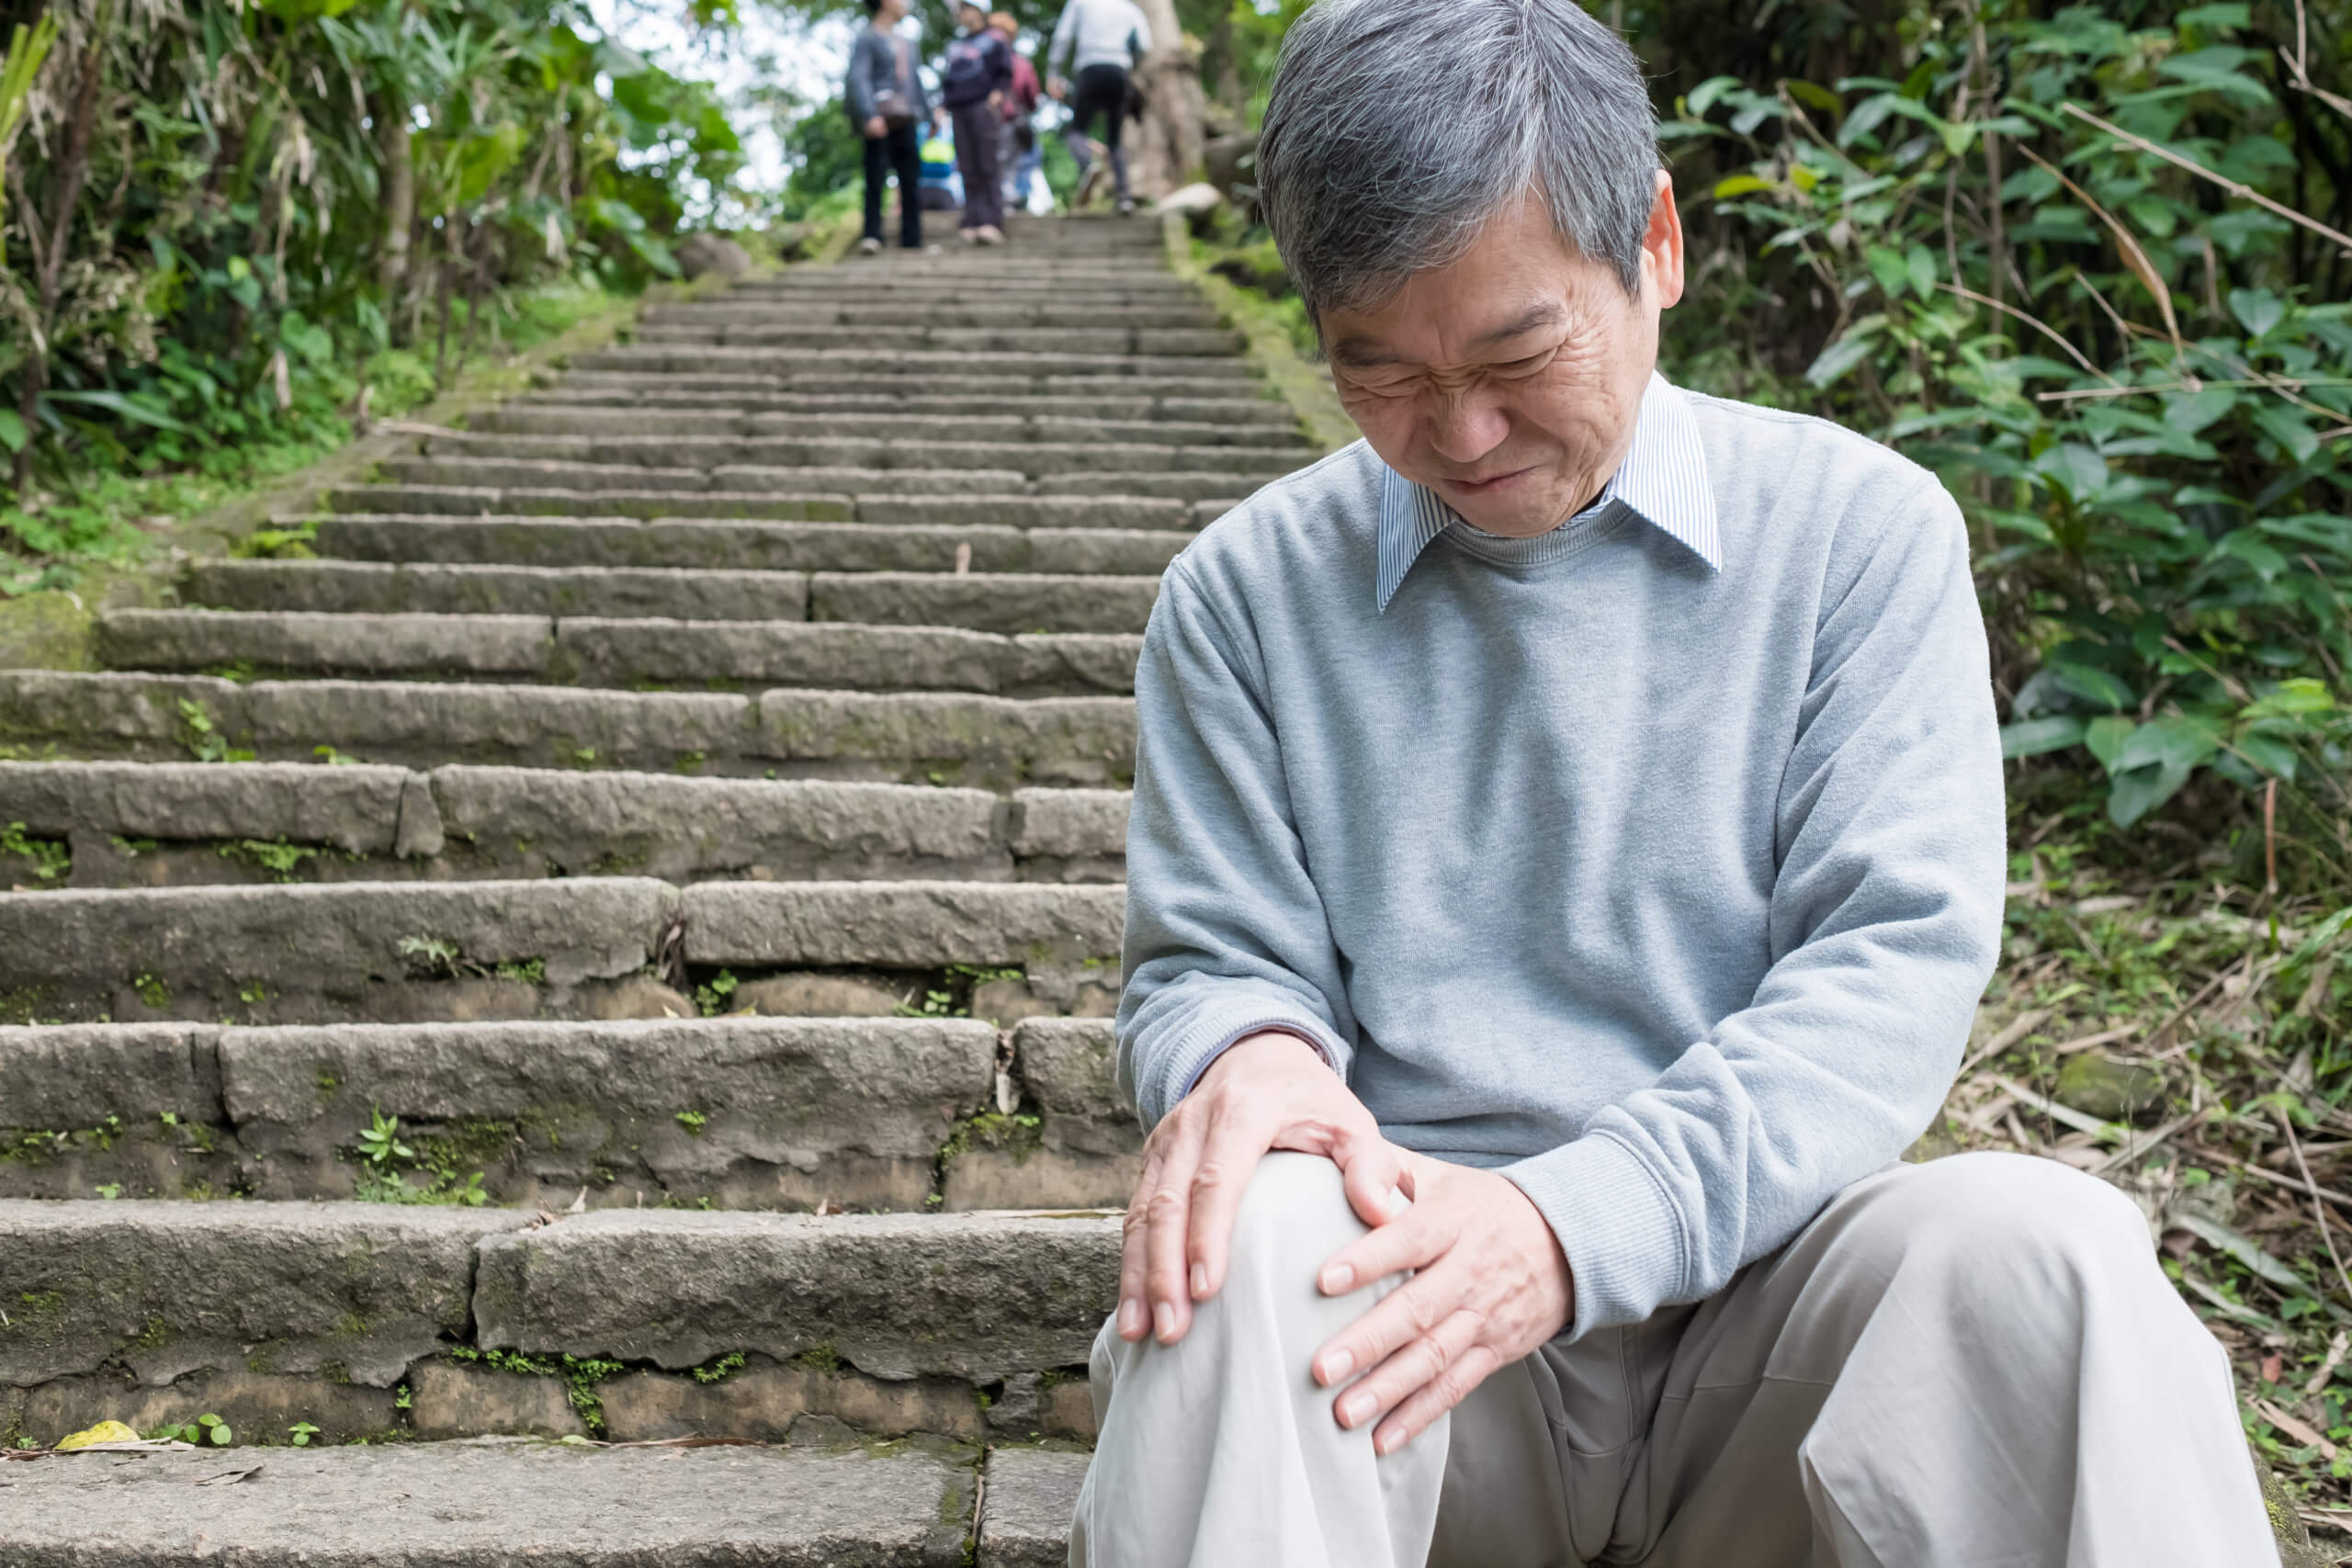 A senior man sits on the steps as his painful knee prevents him from continuing.